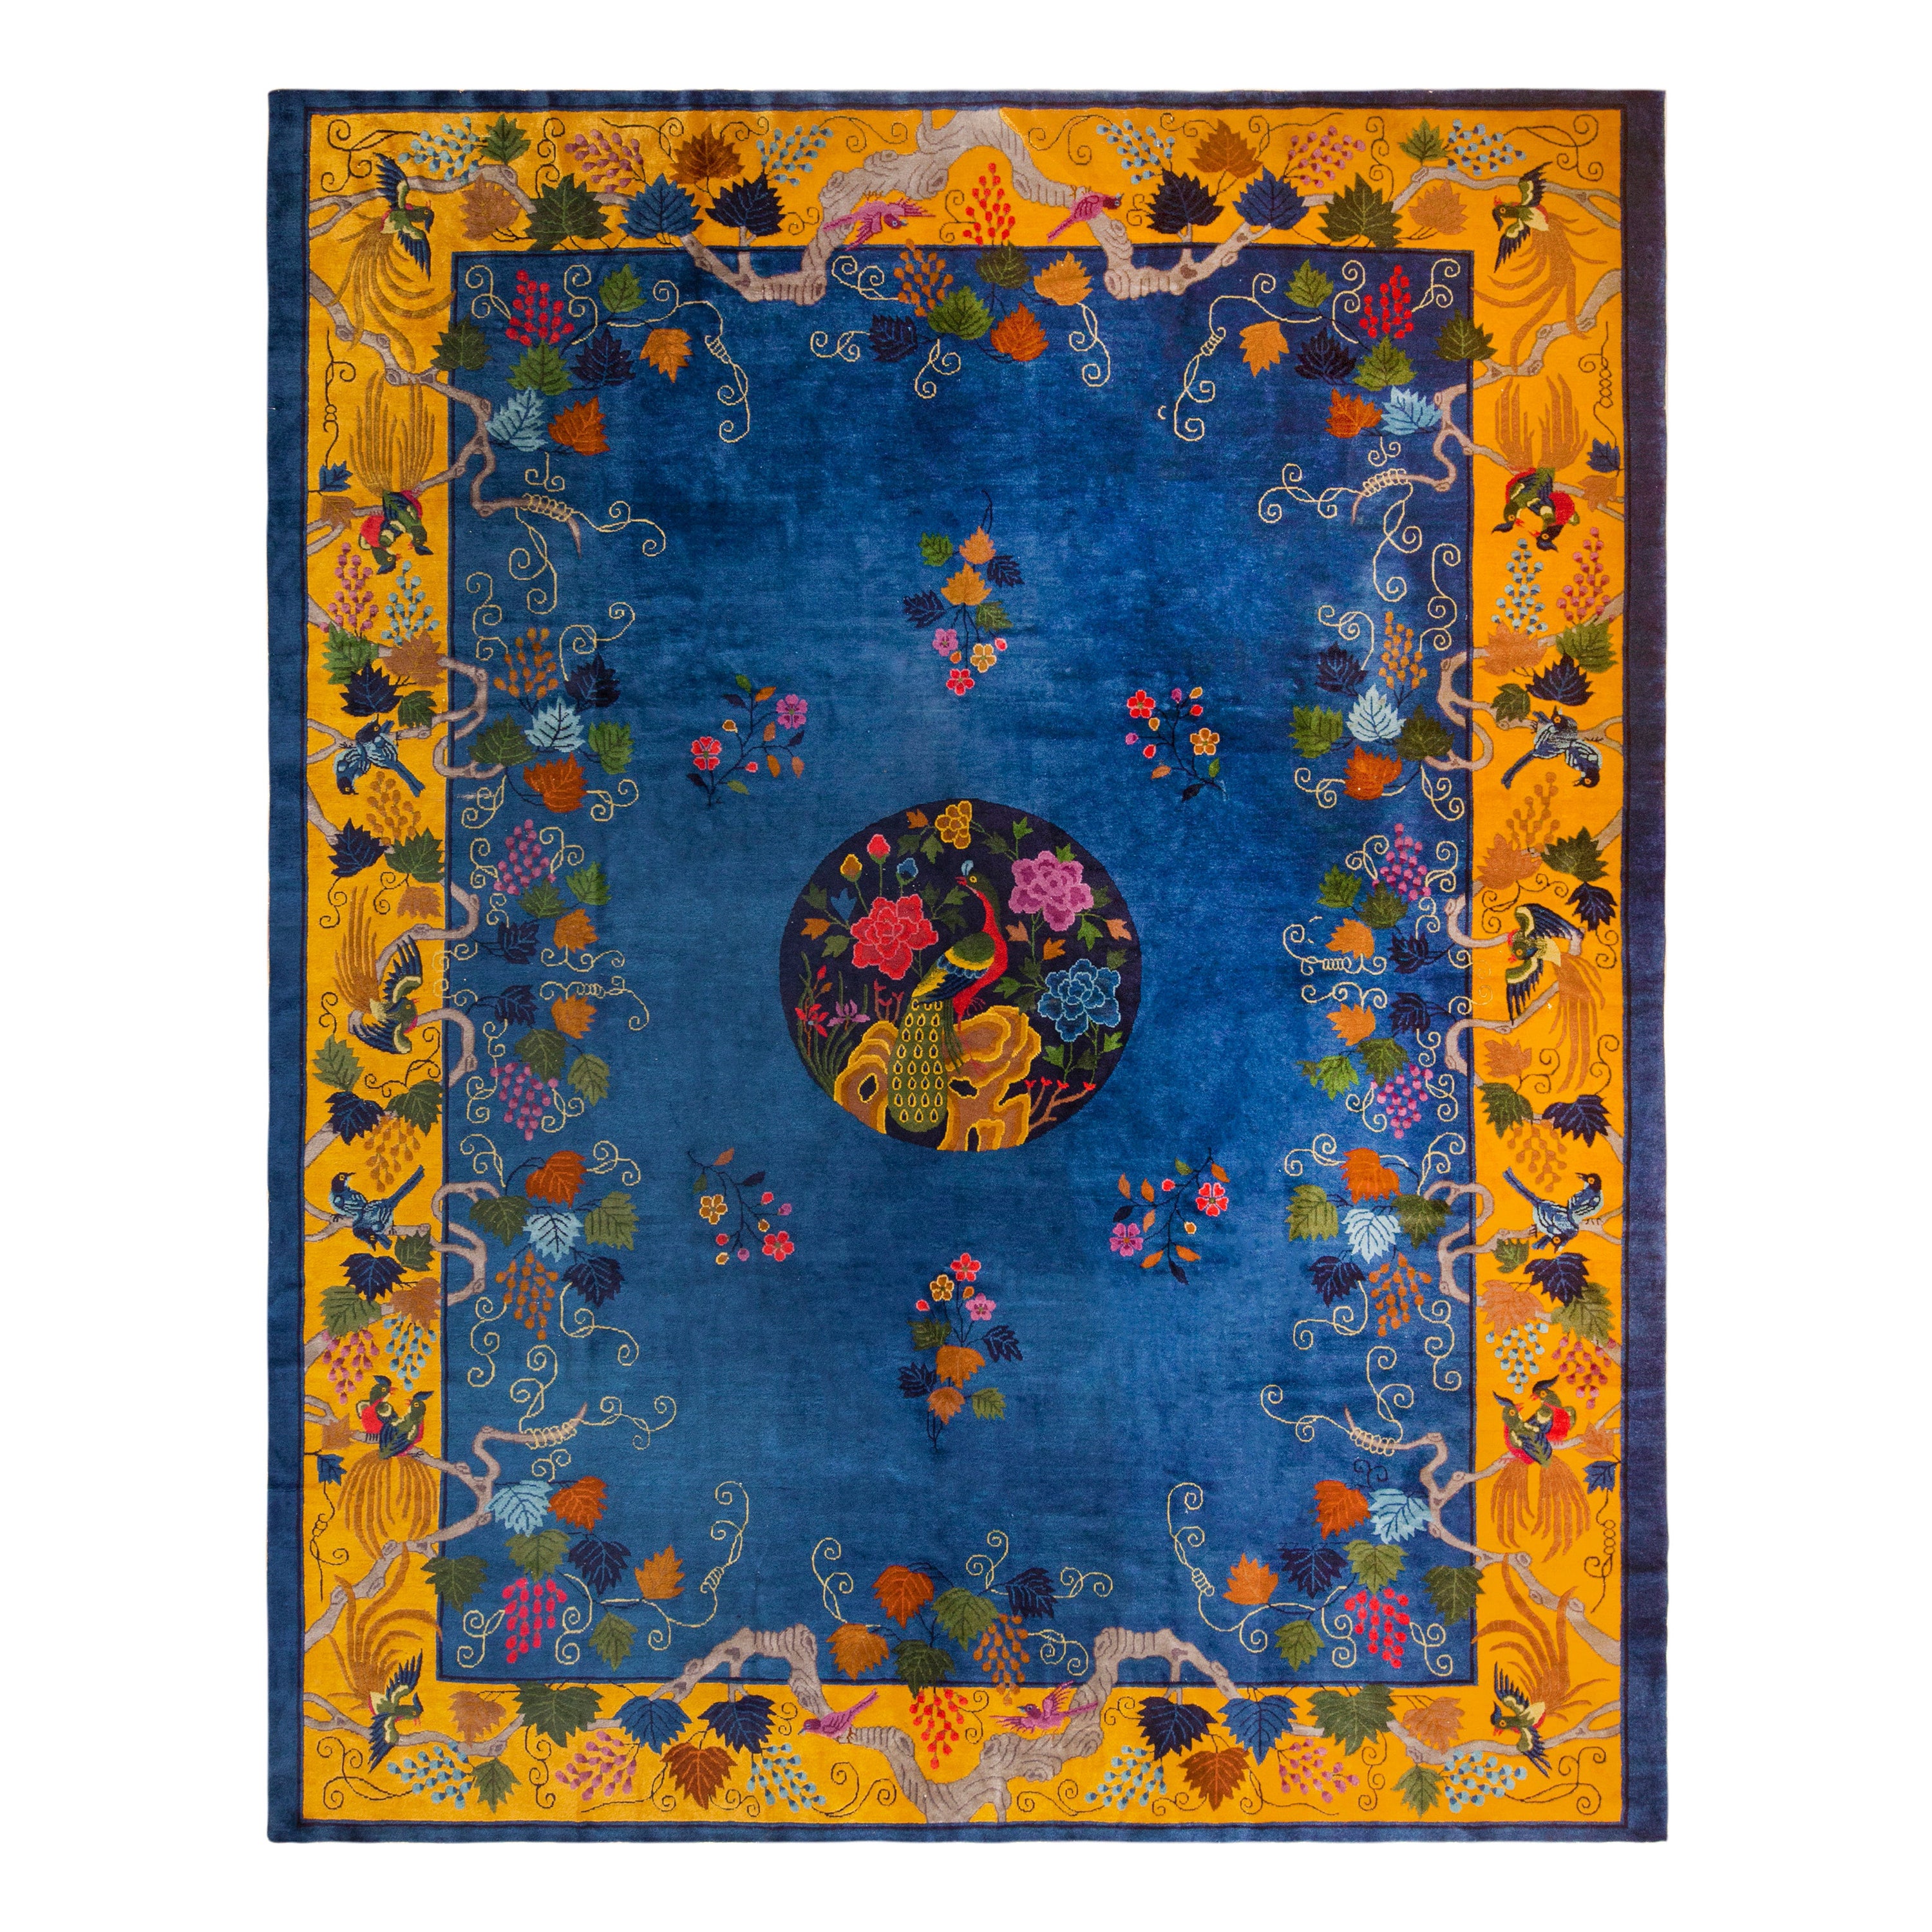 Eclectic Colorful Antique Chinese Art Deco Peacock Rug 10' x 12'1"